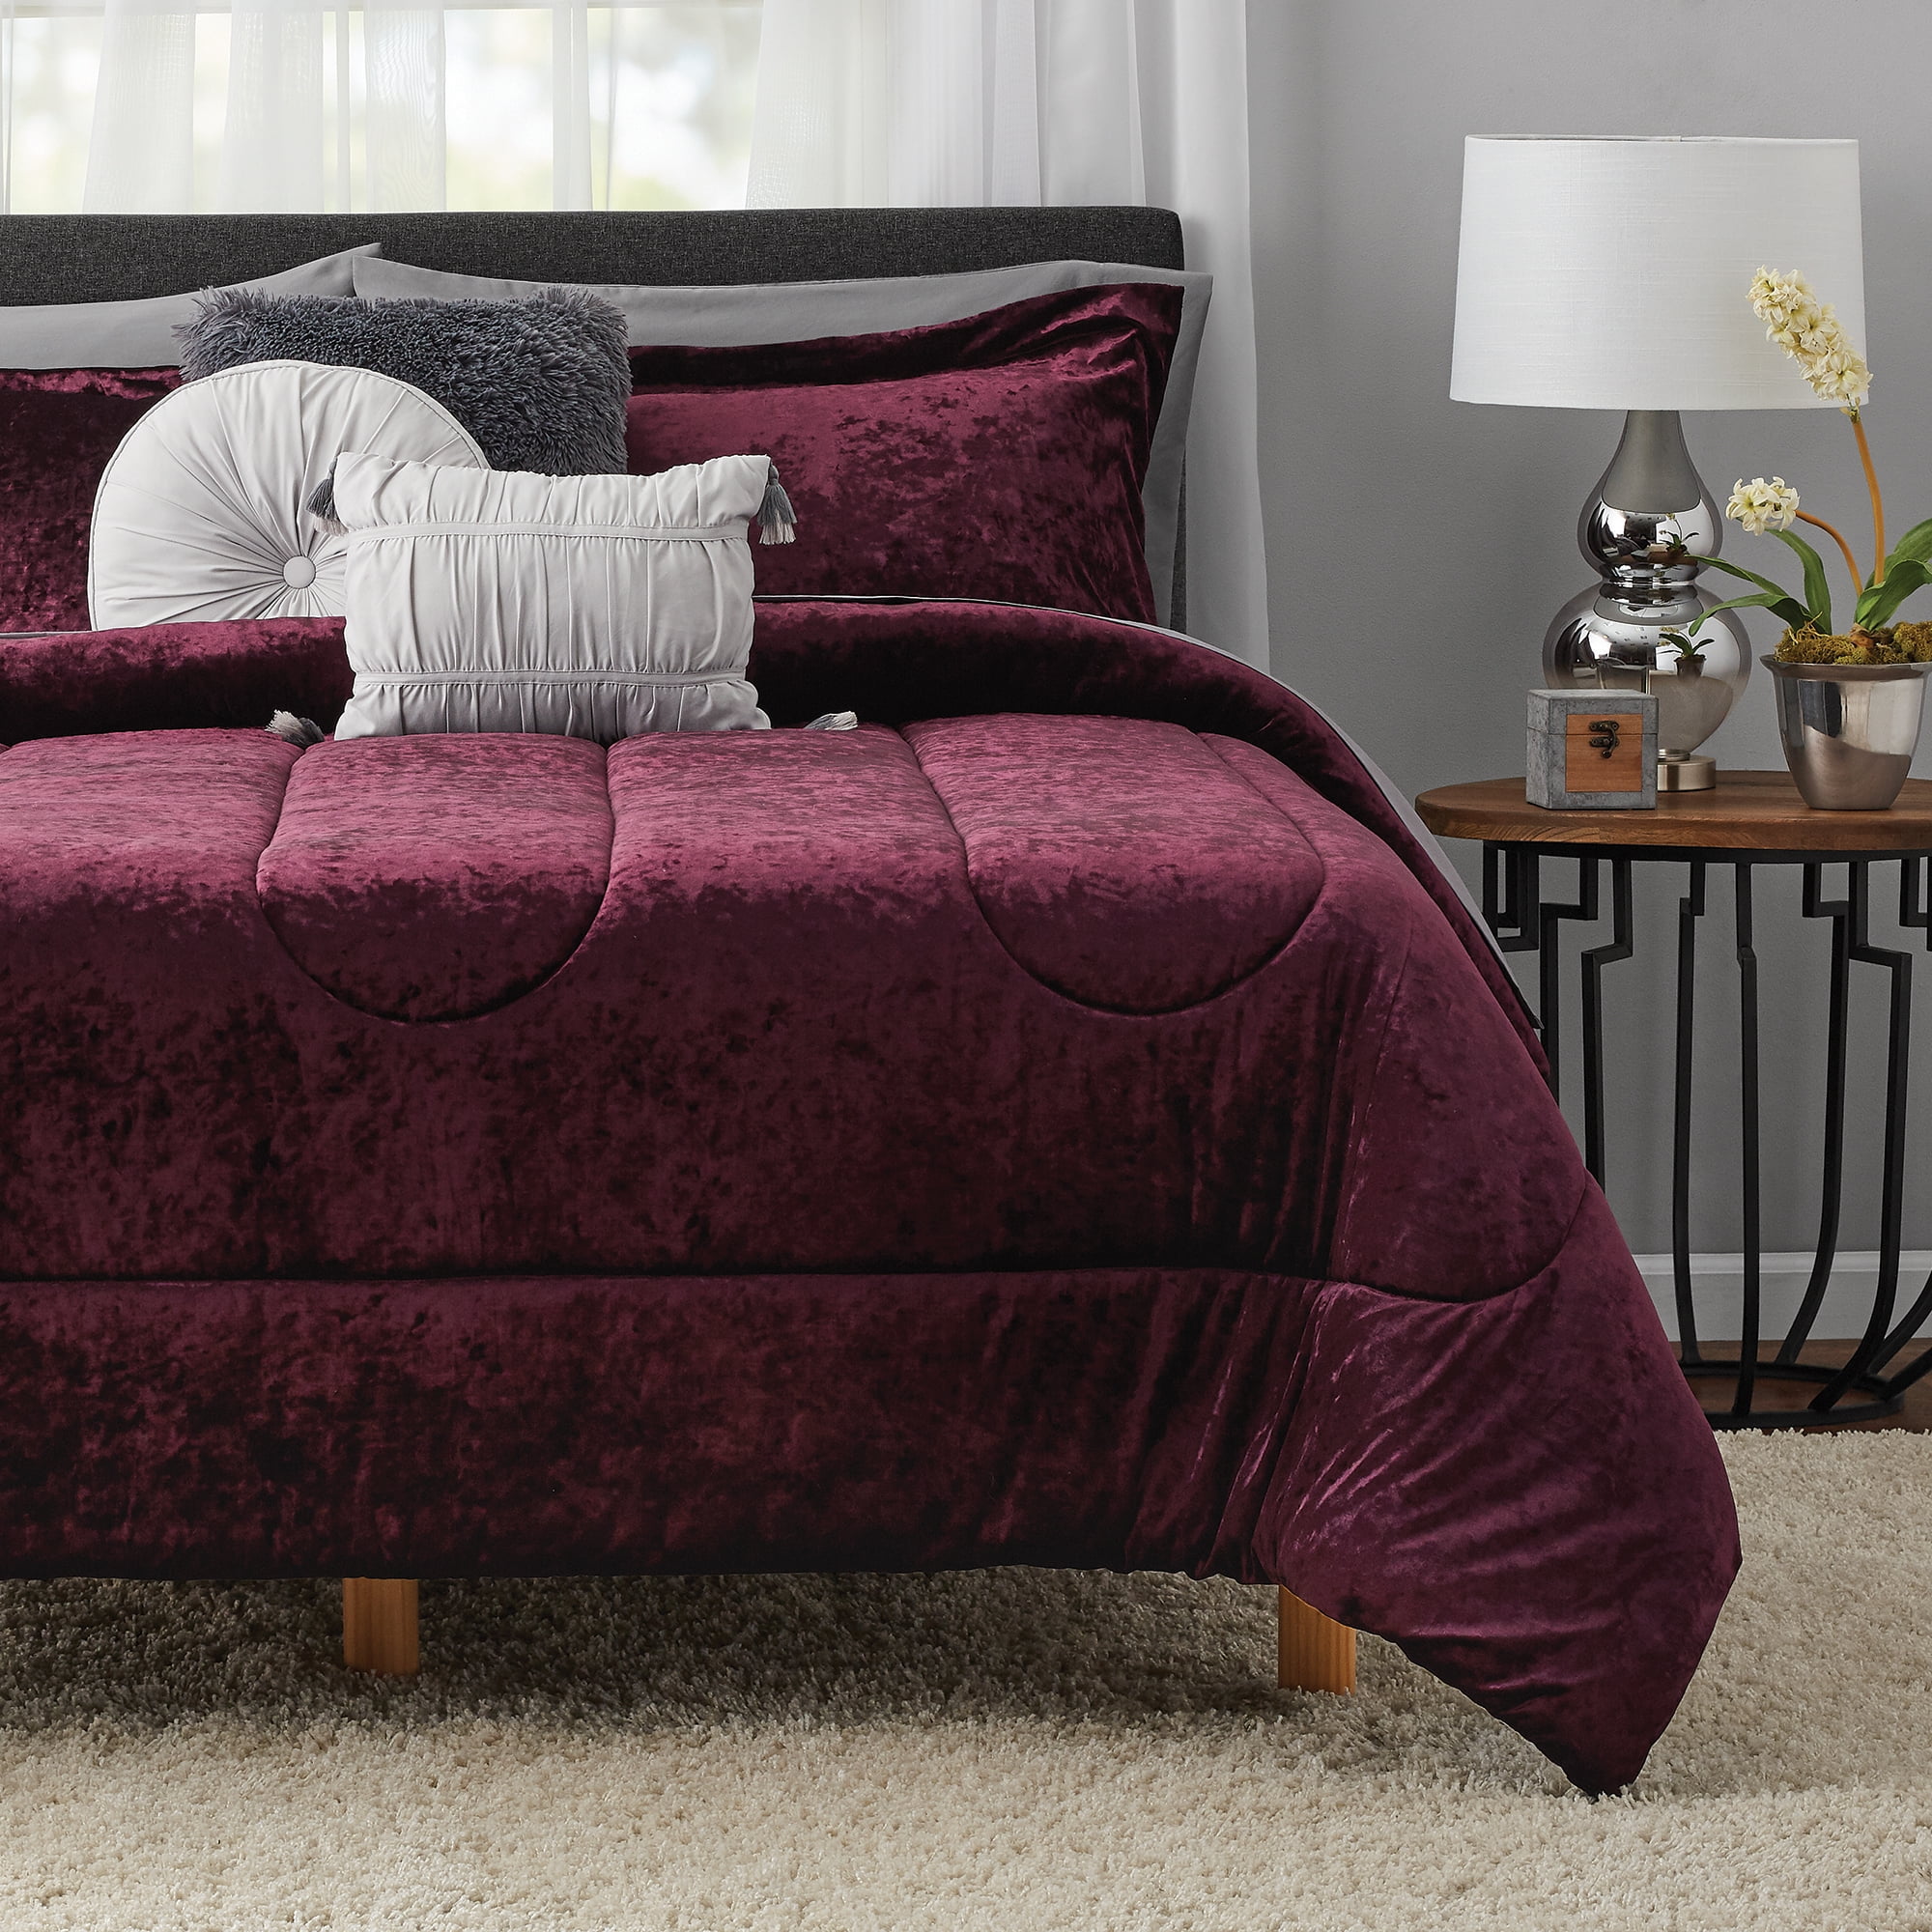 Mainstays Purple Velvet 10 Piece Bed In, Bed In A Bag Purple King